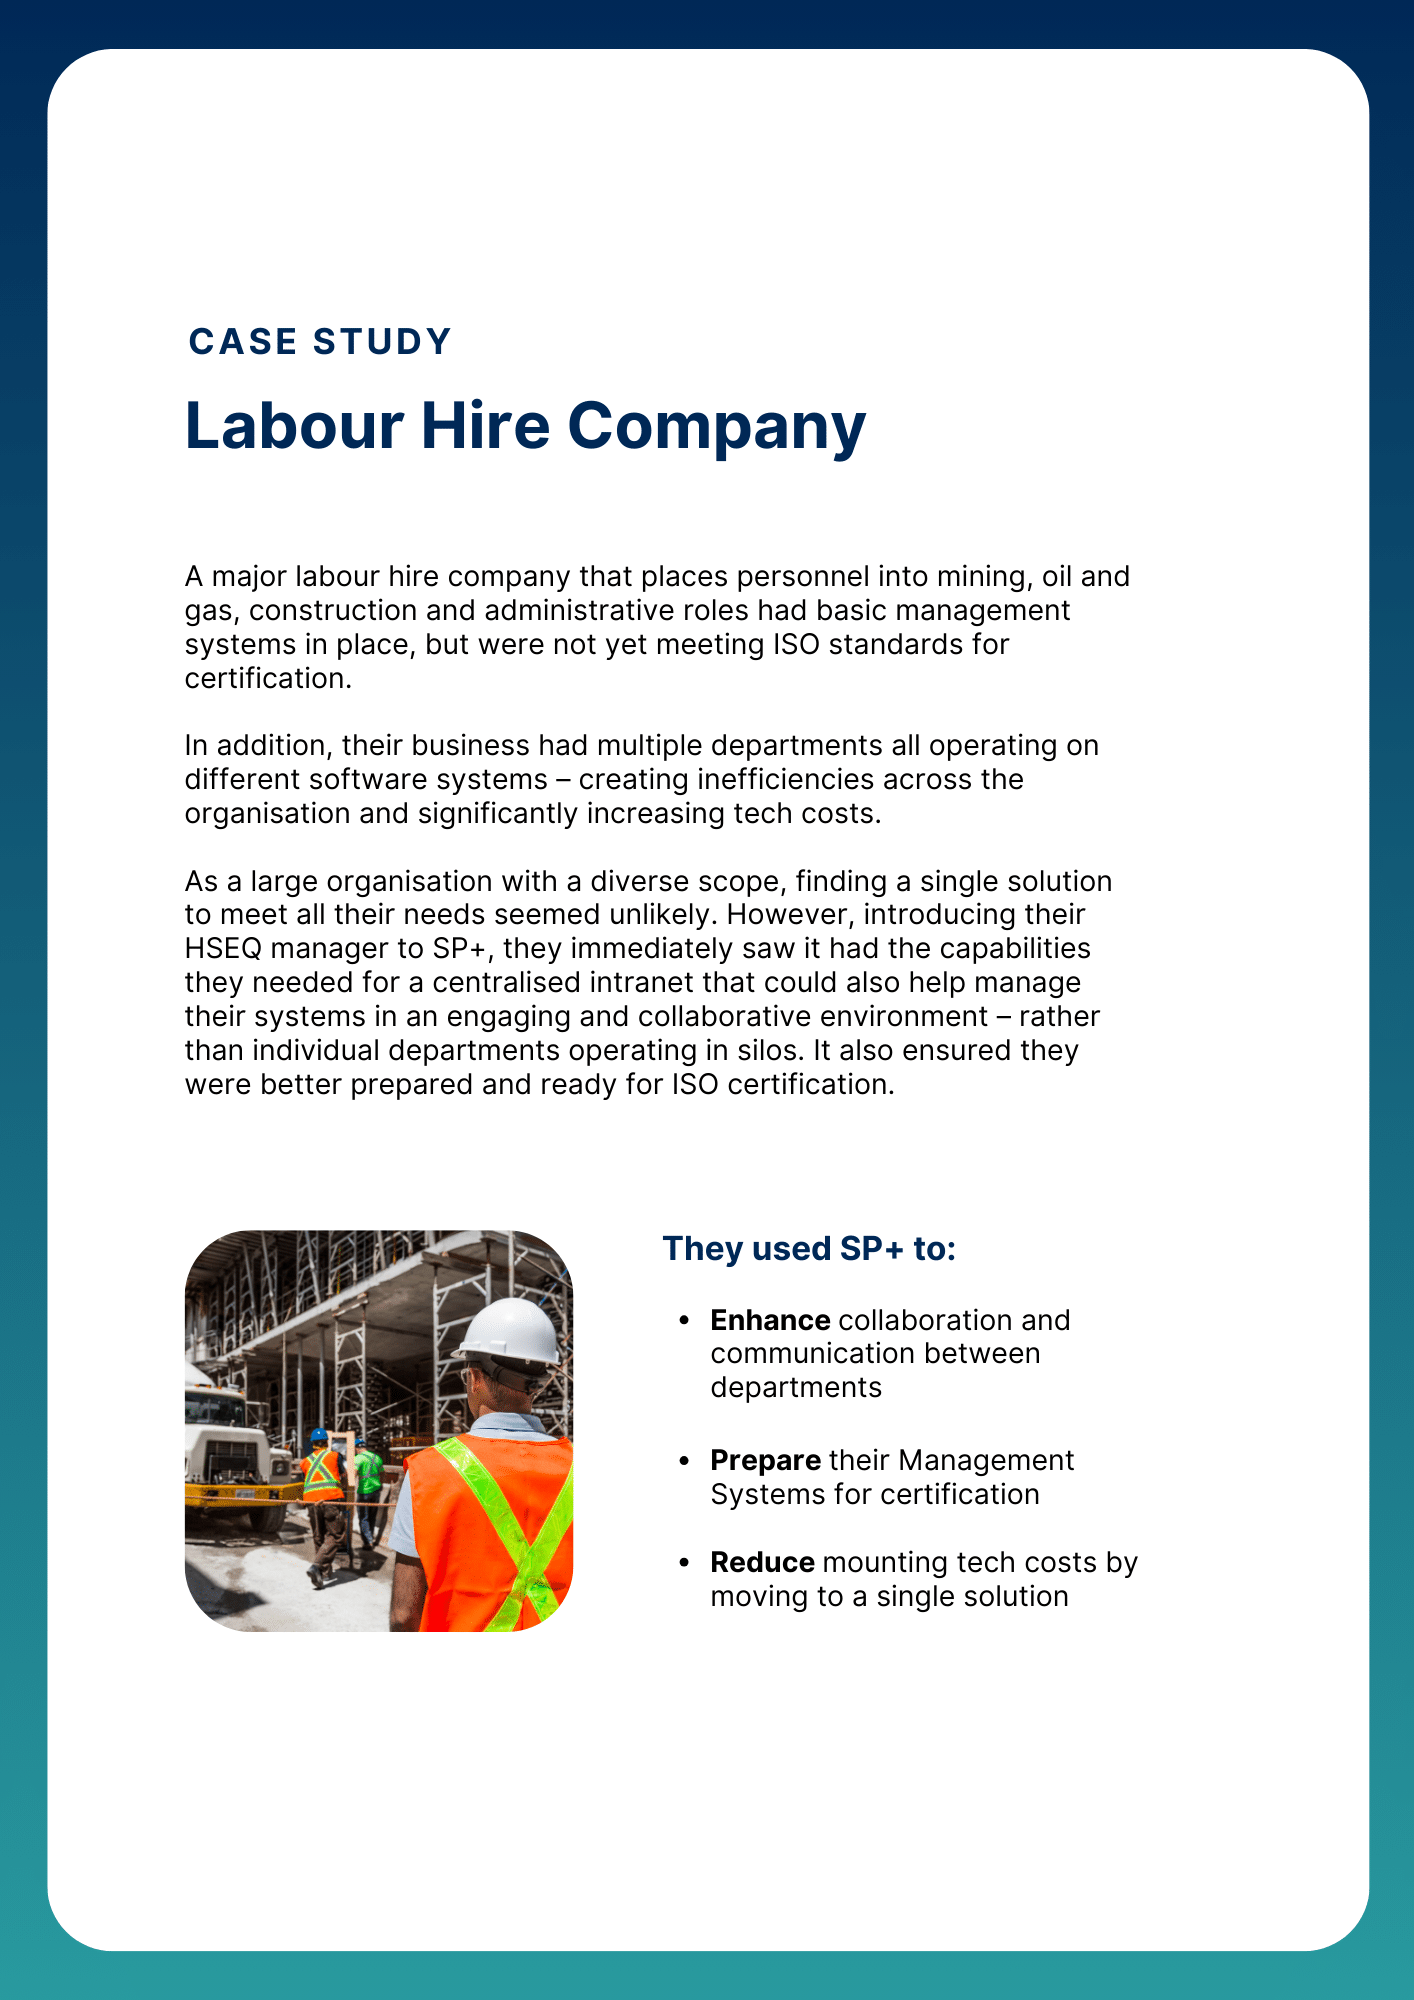 A case study with a major labour-hire company tells how they used Southpac Plus to enhance collaboration between departments.